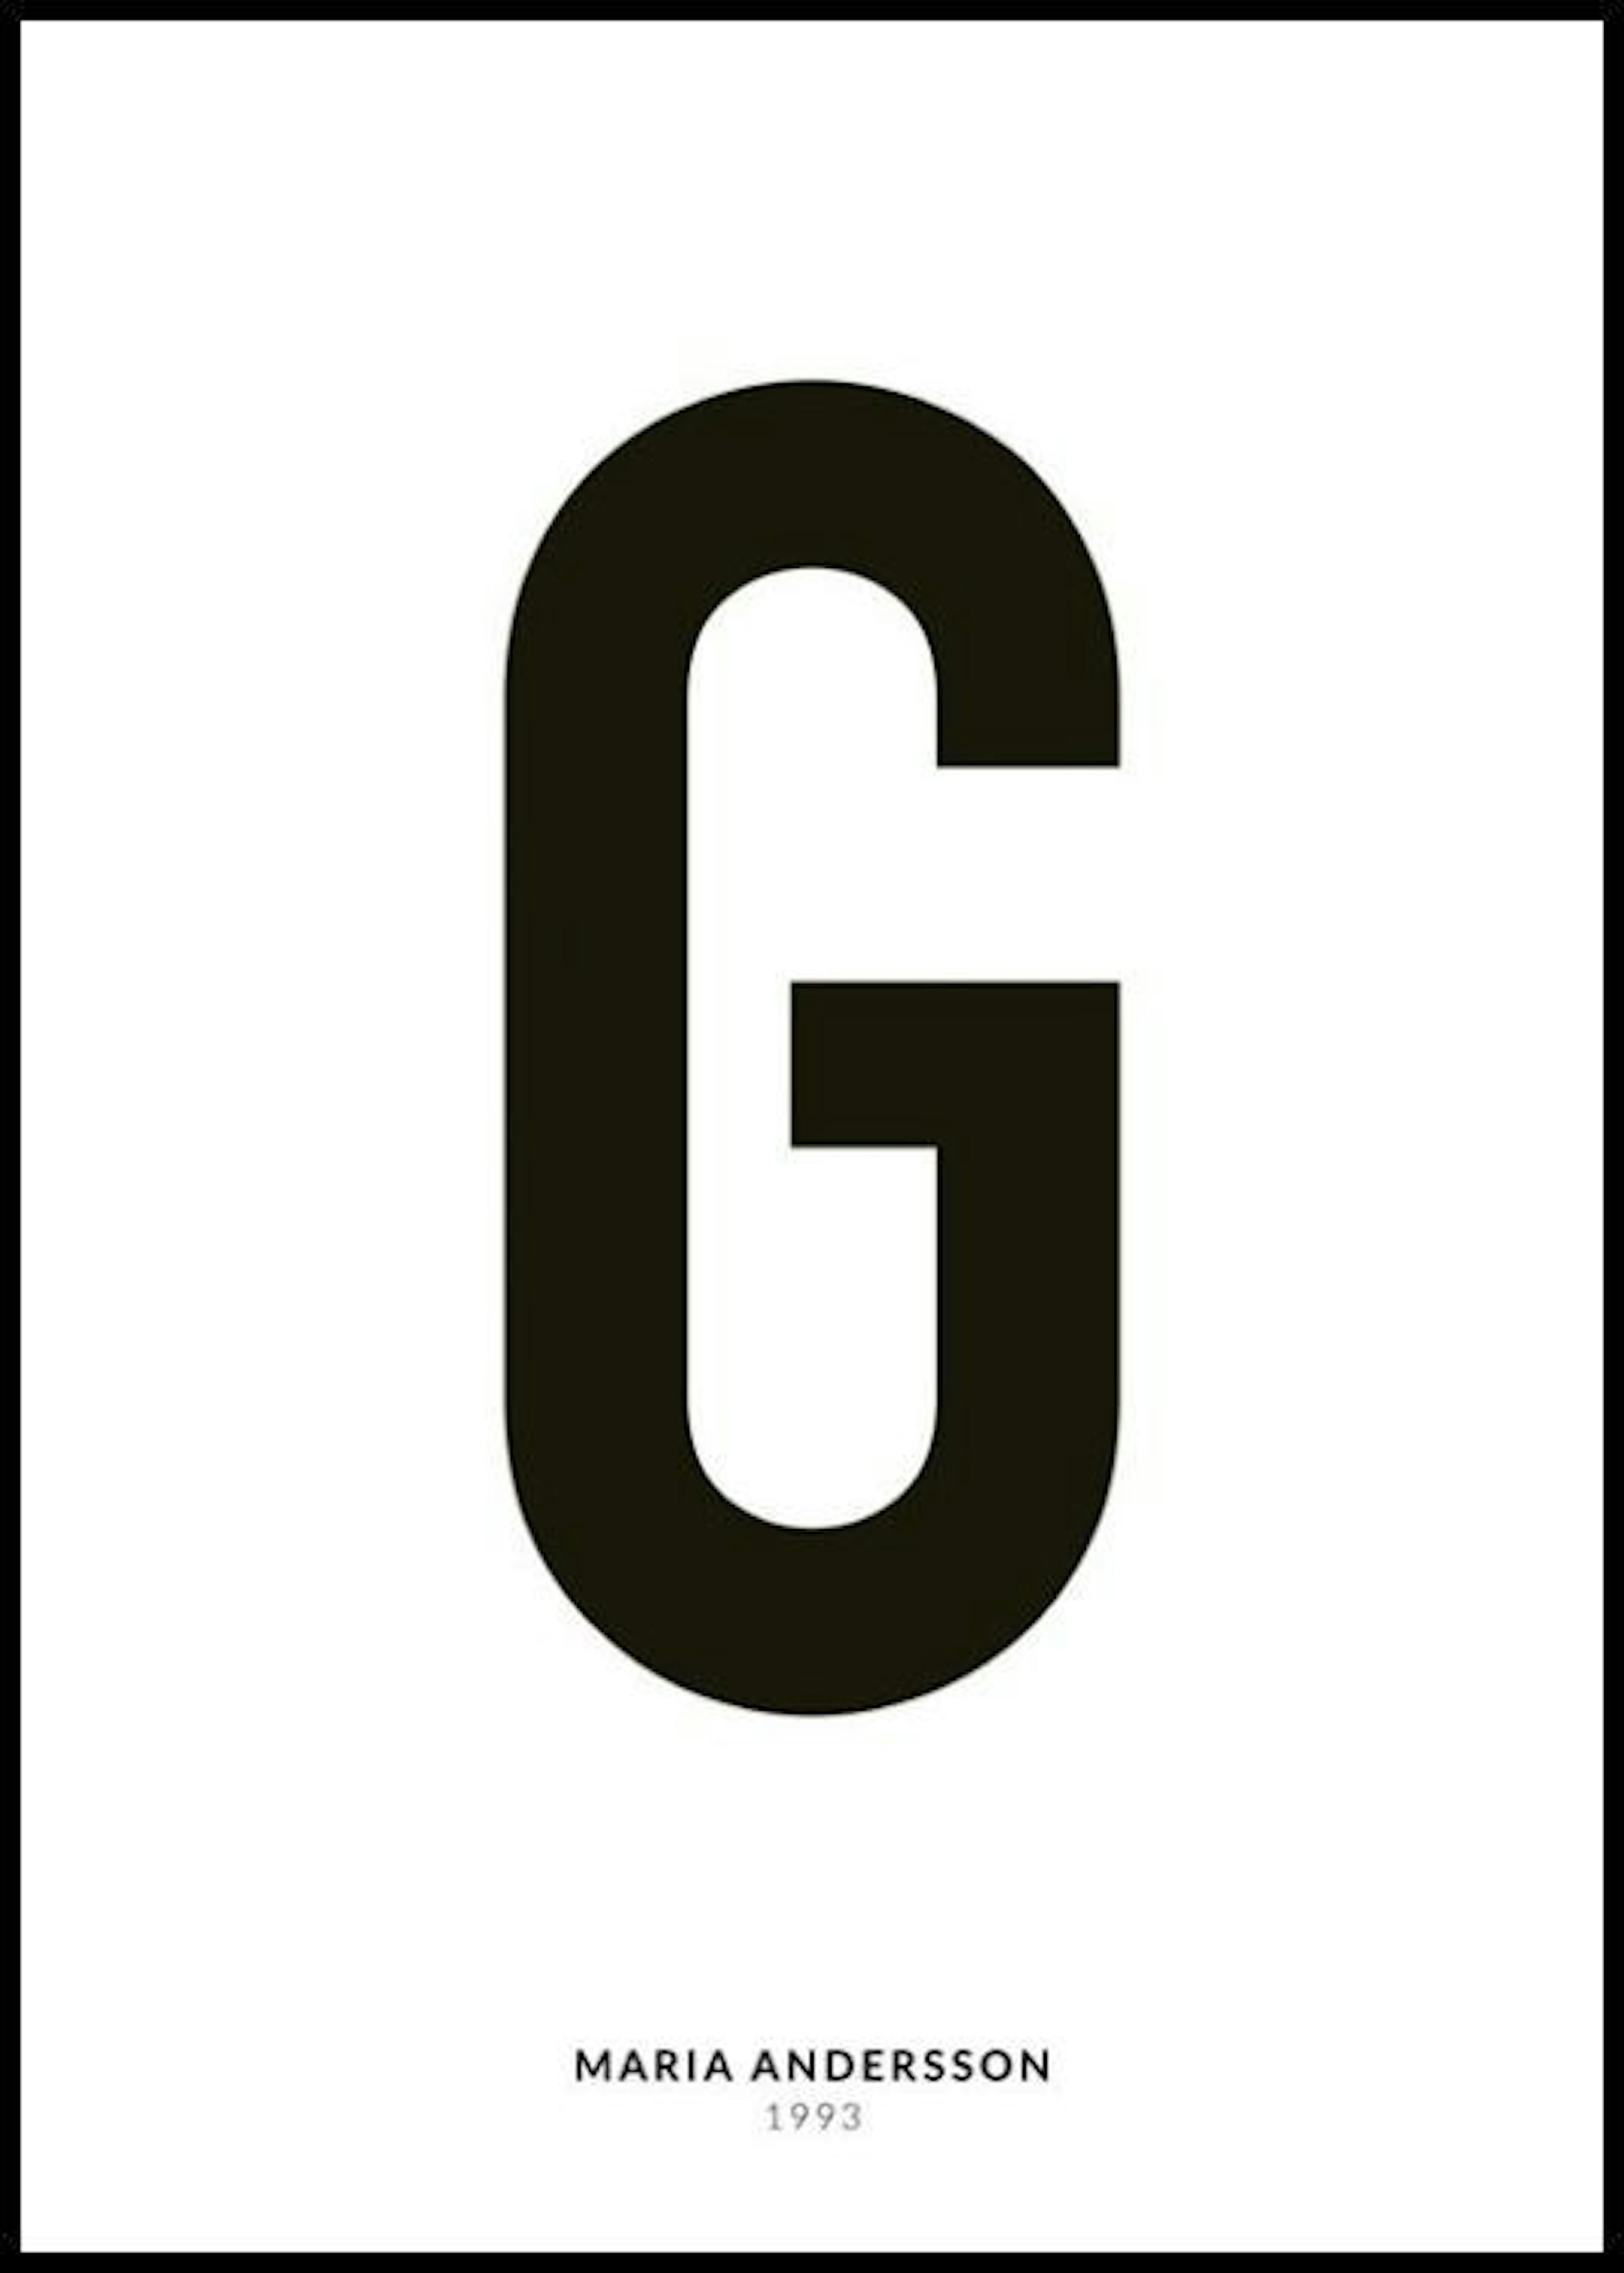 My Letter G Personal Poster thumbnail